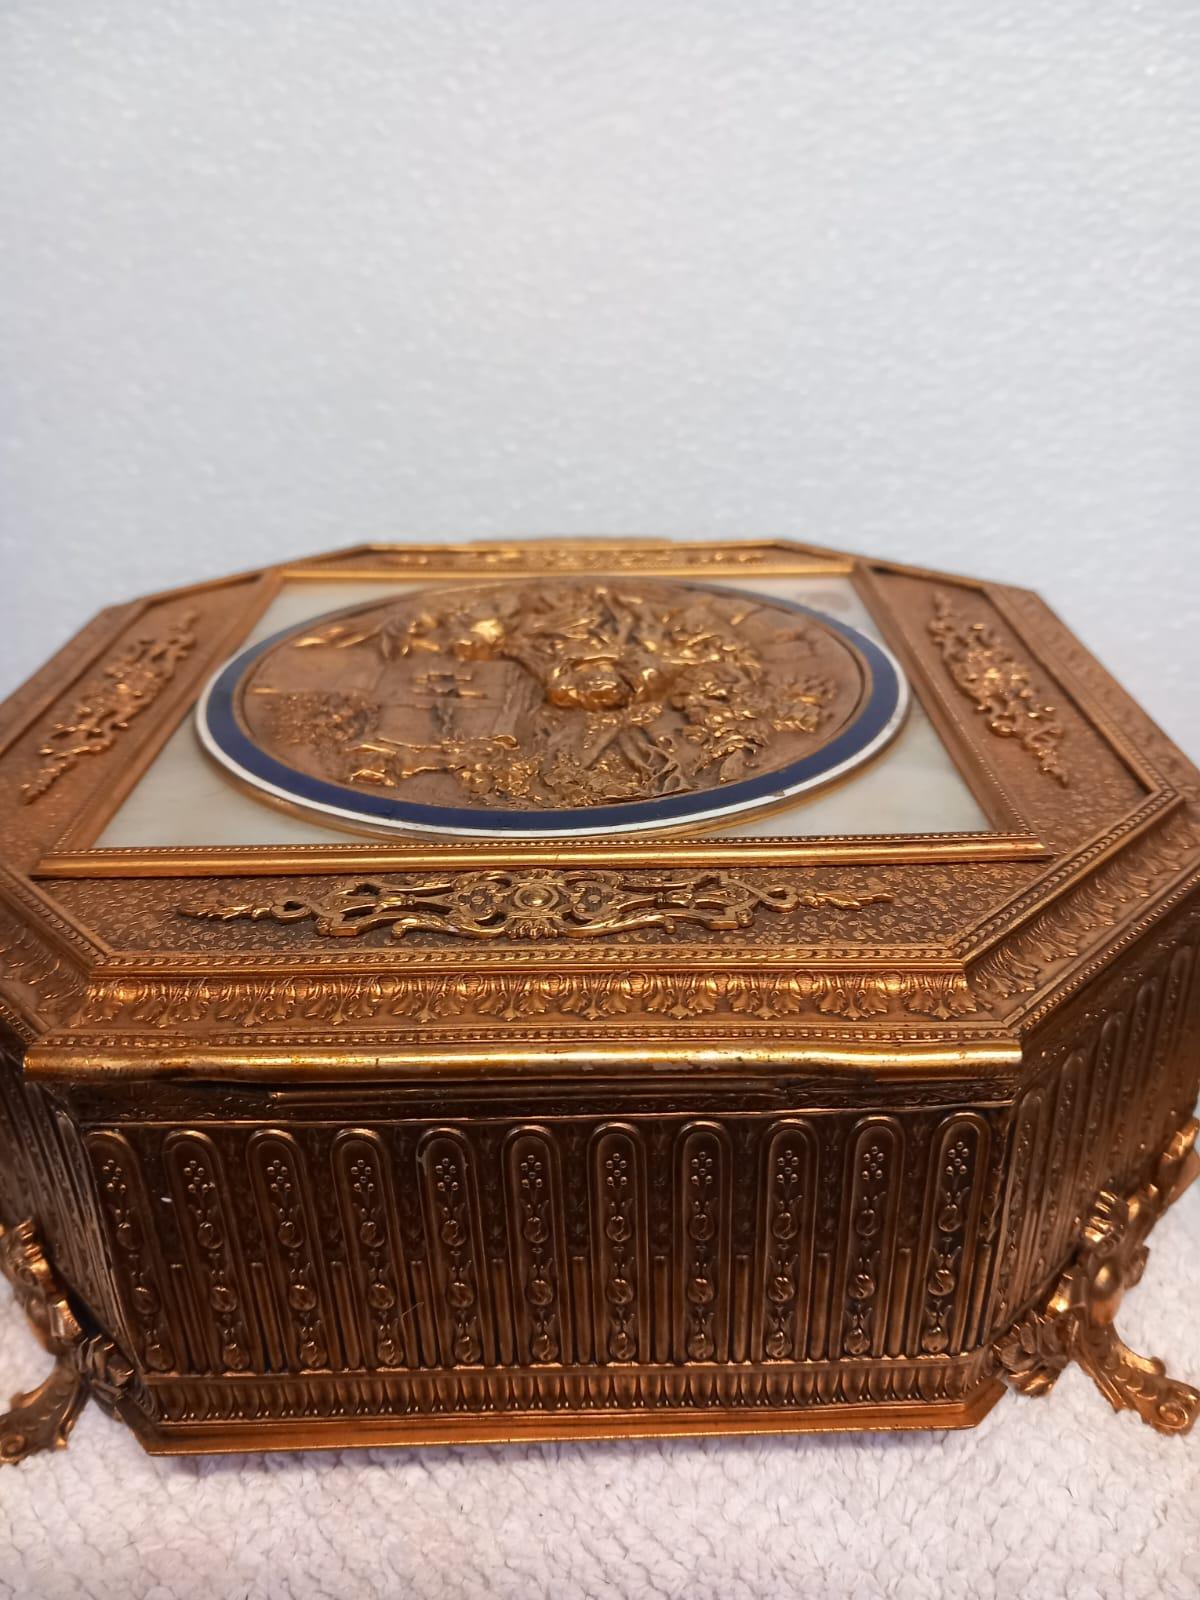 Palais Royal gilt bronze and mother of pearl jewellery casket or trinket box For Sale 3